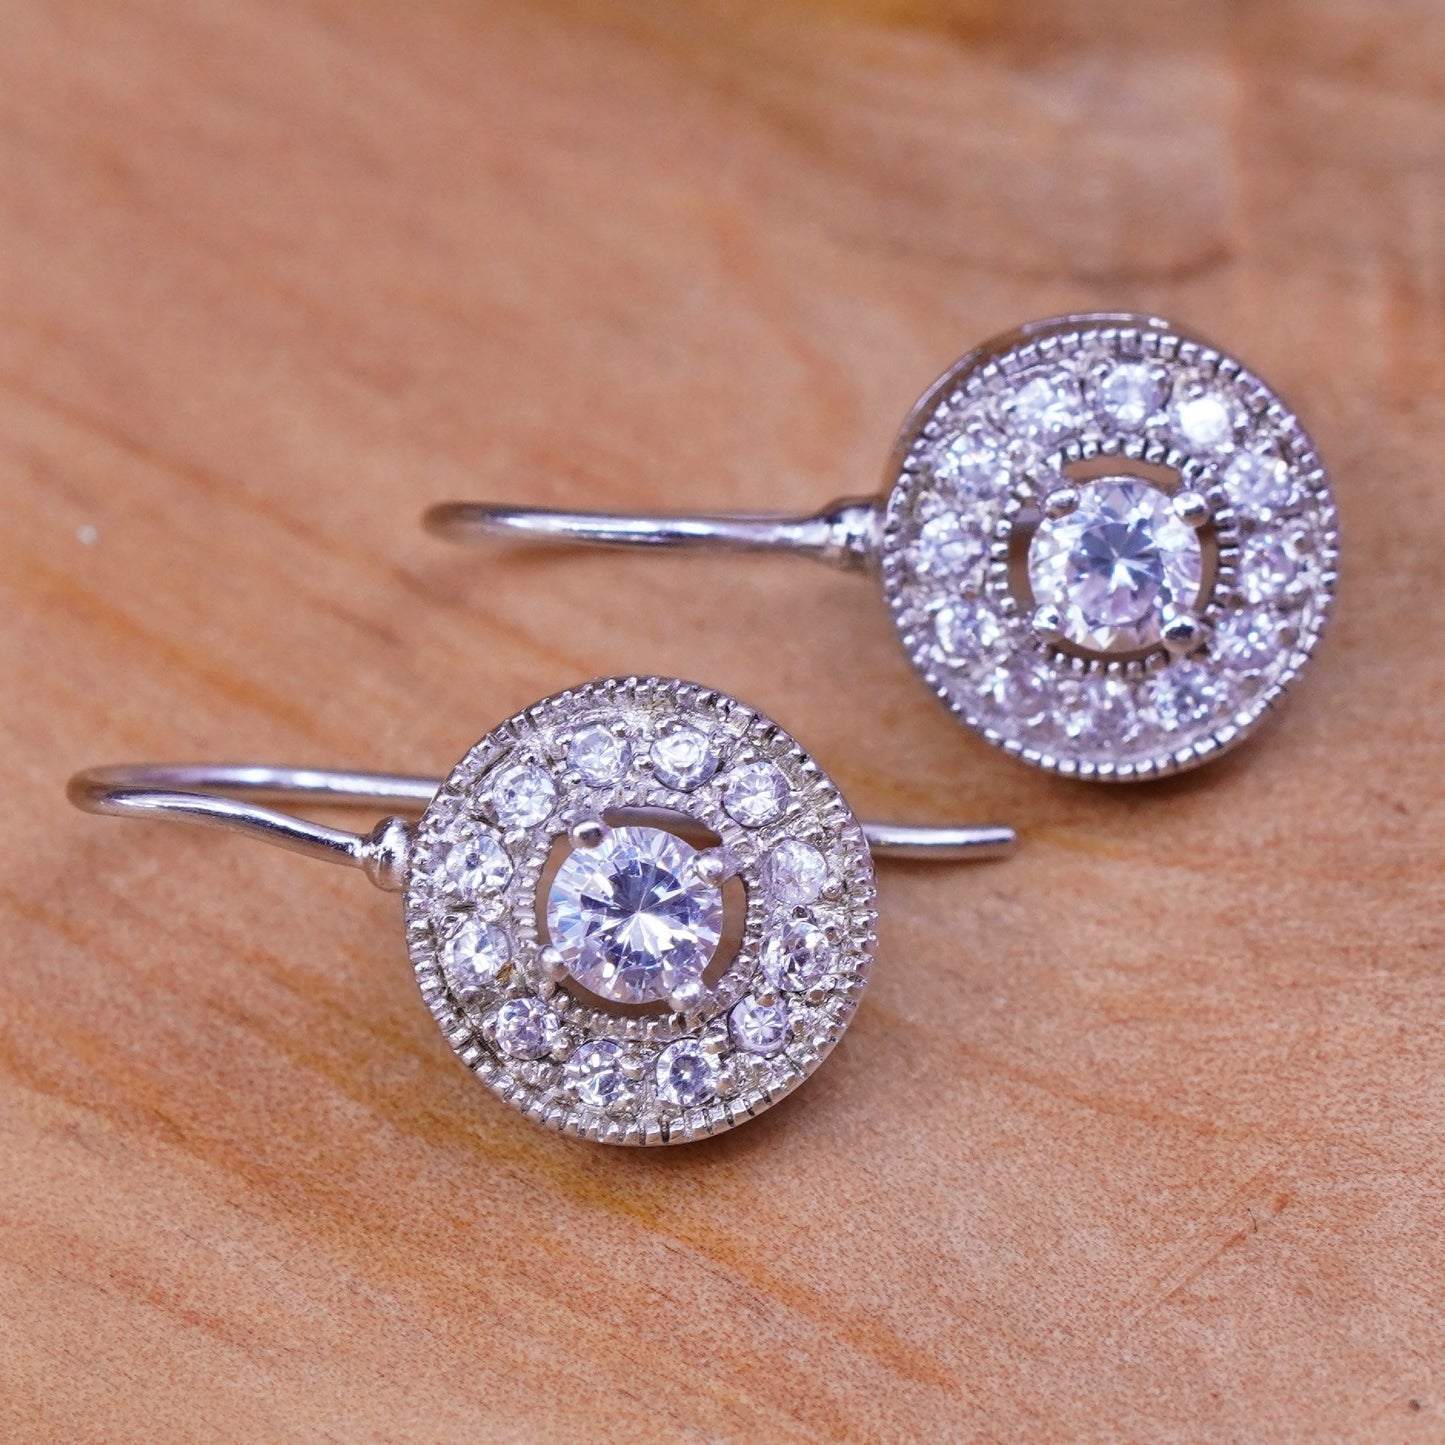 Vintage ATI Sterling silver earrings, 925 drops with cluster Cz Around